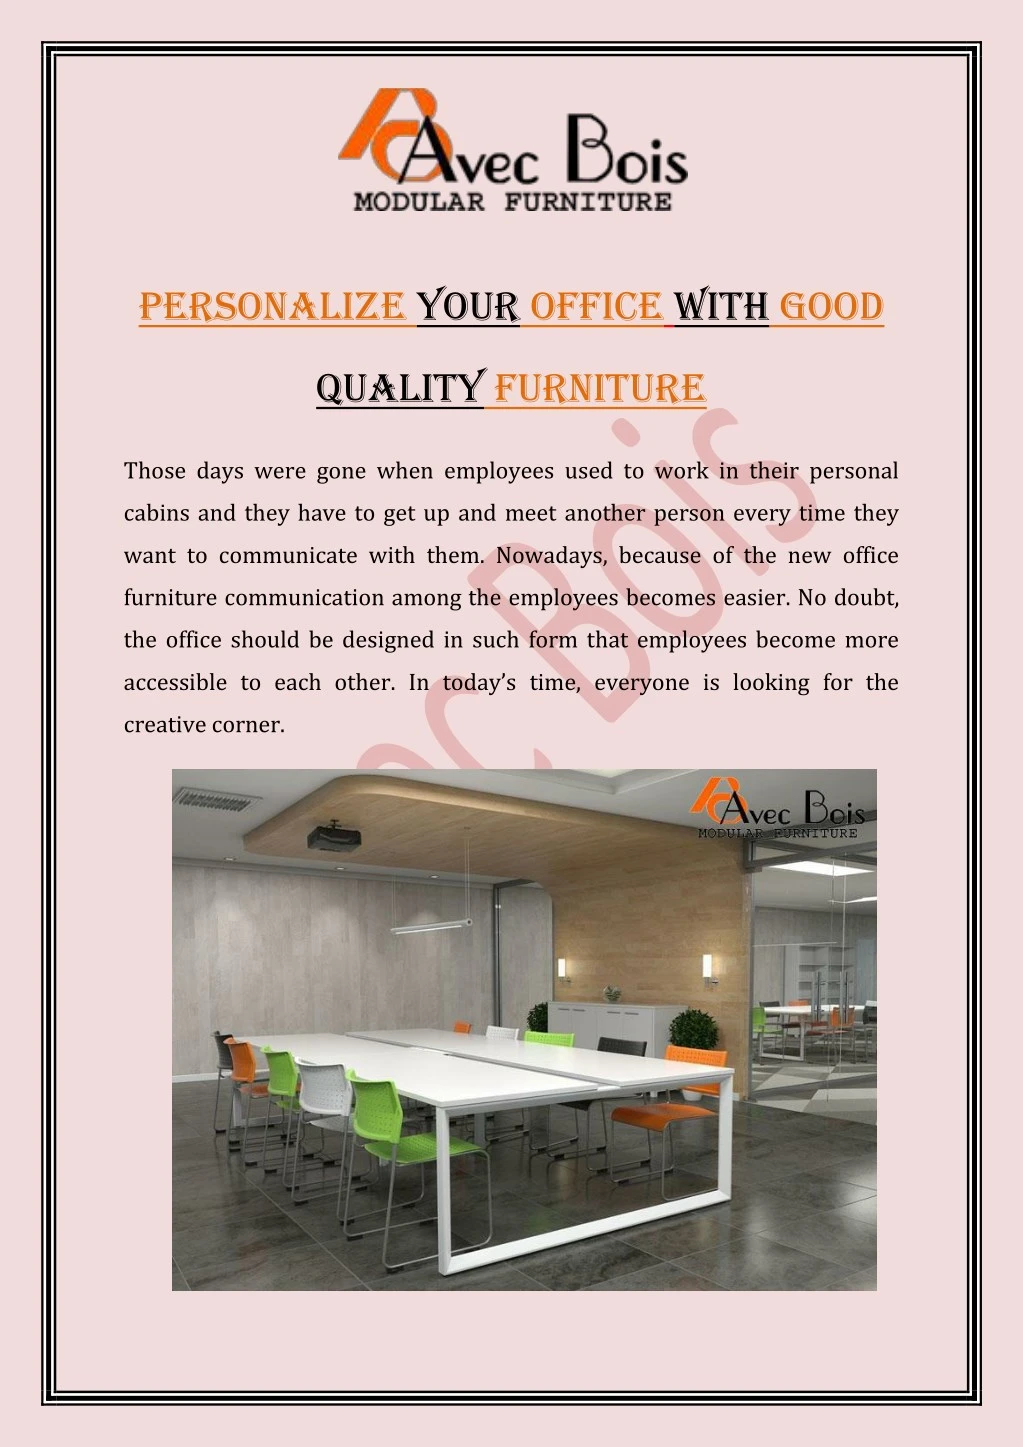 personalize your office with good